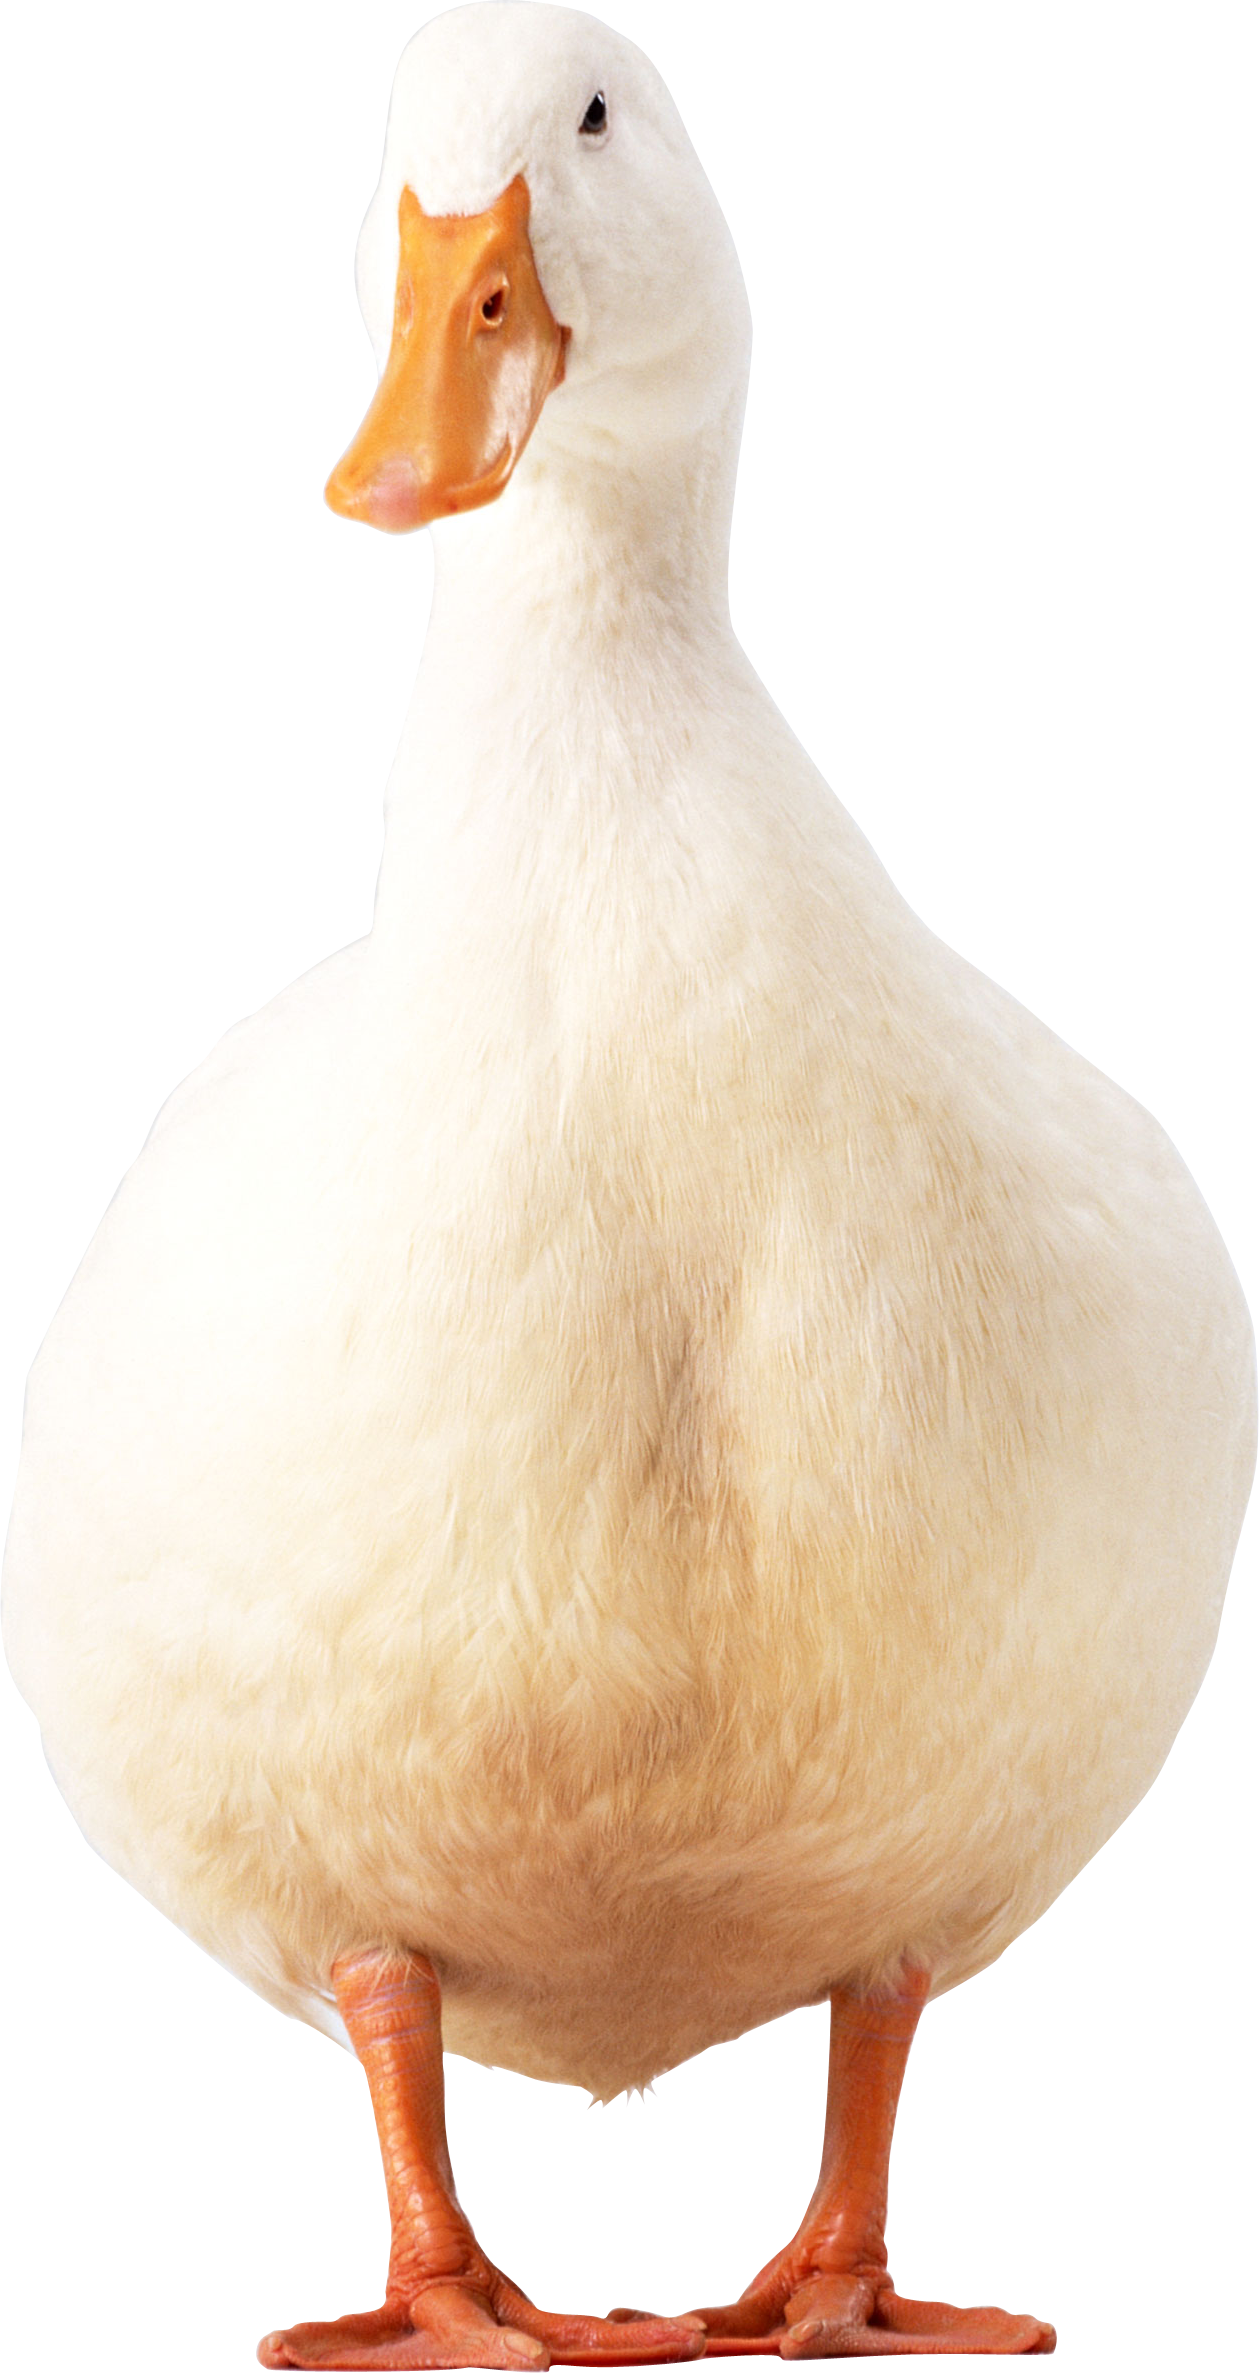 White duck PNG image